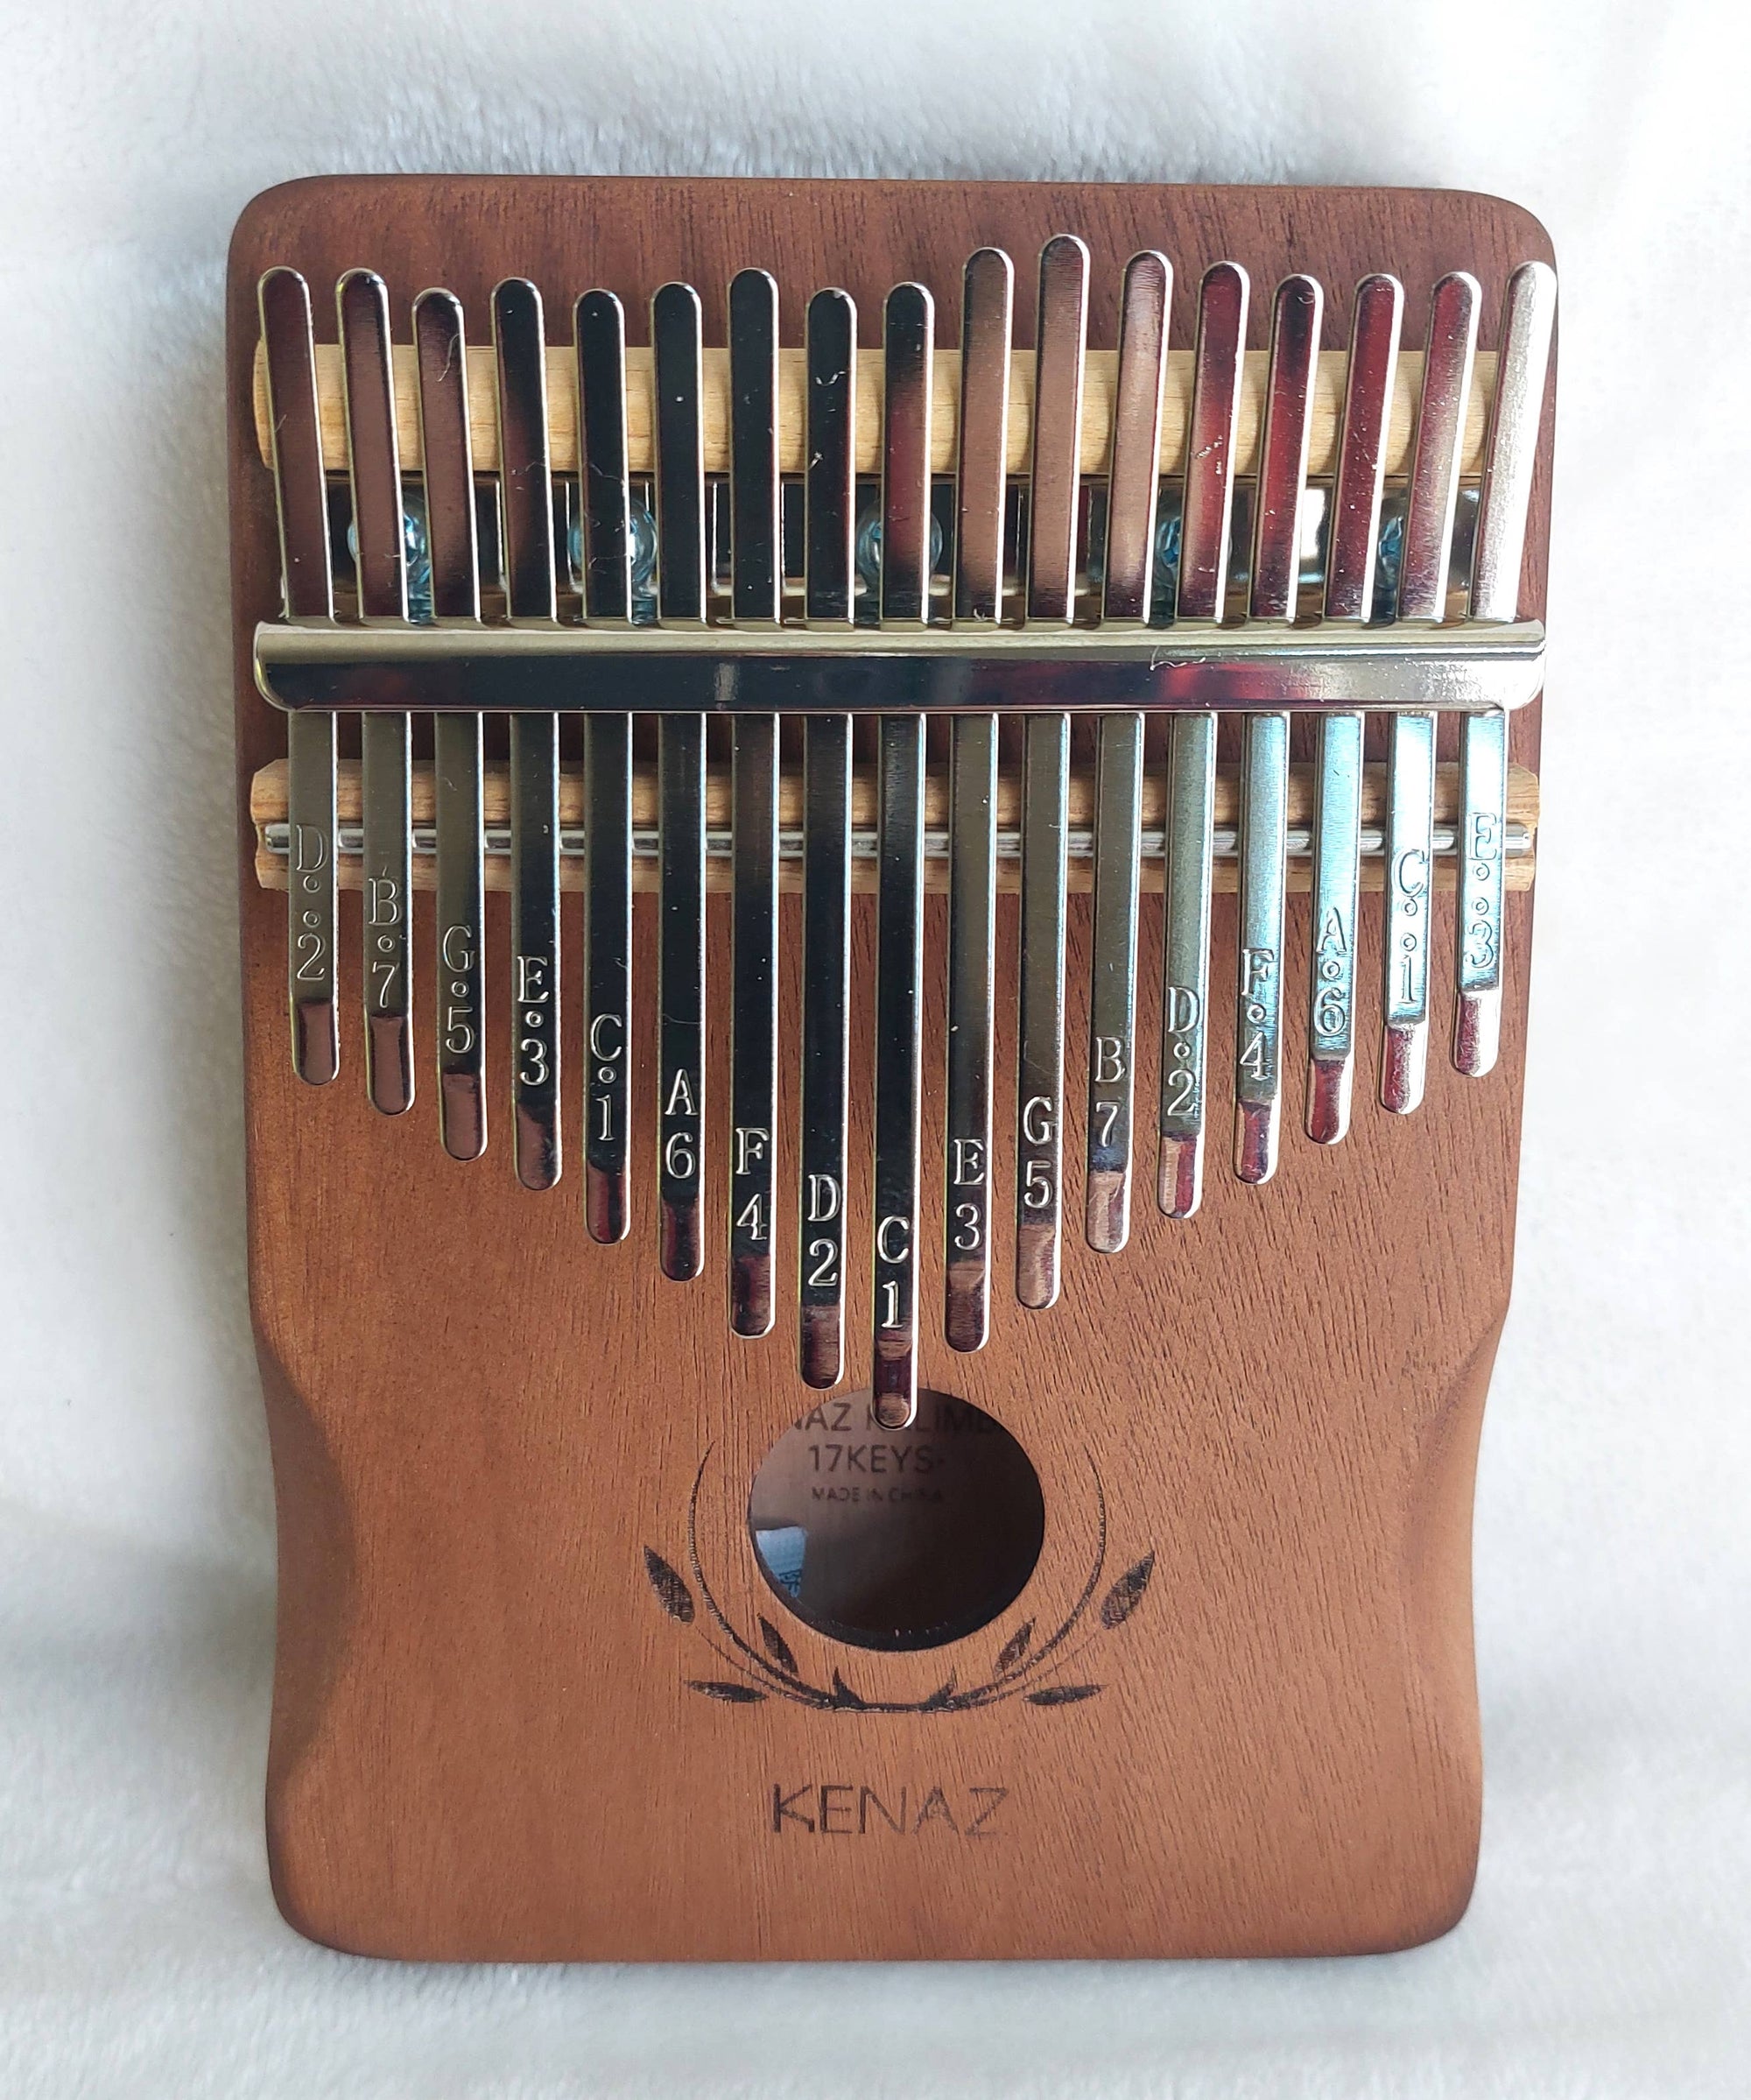 A wooden 17-key Kalimba Musical Instrument with tines labeled with musical note names, photographed on a white background.